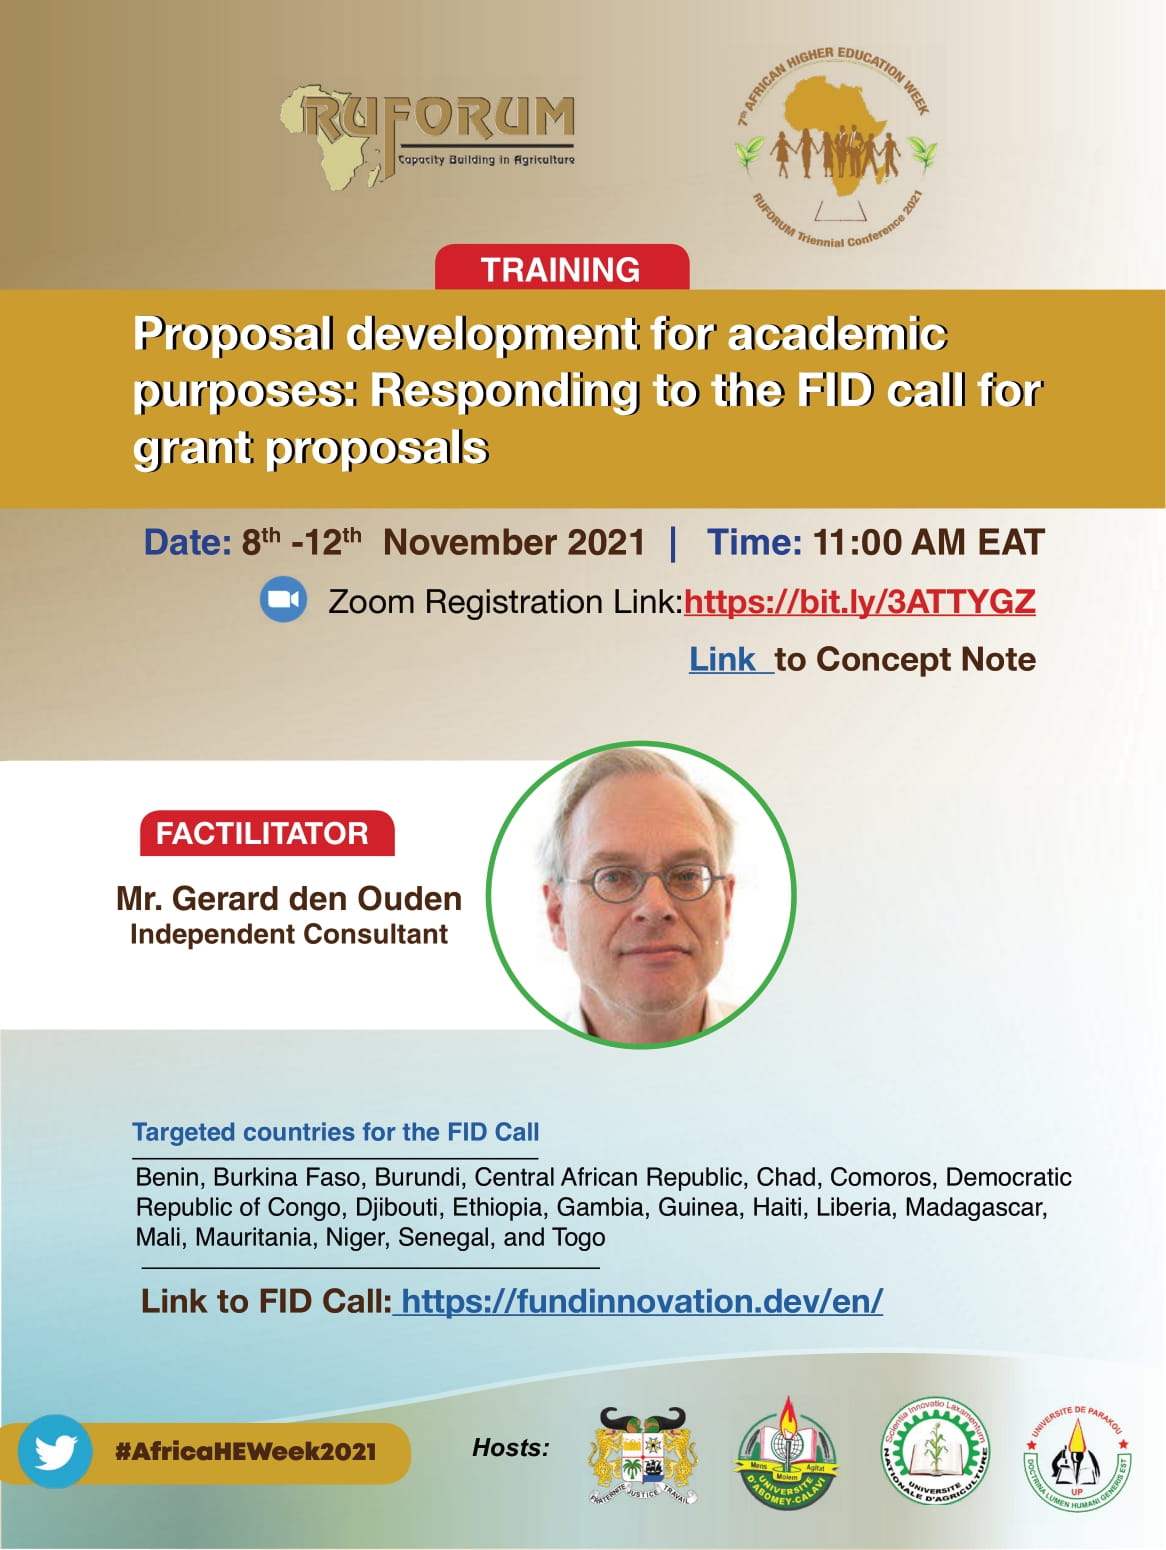 TRAINING INVITATION] PROPOSAL DEVELOPMENT FOR ACADEMIC PURPOSES: RESPONDING TO THE FID CALL FOR GRANT PROPOSALS